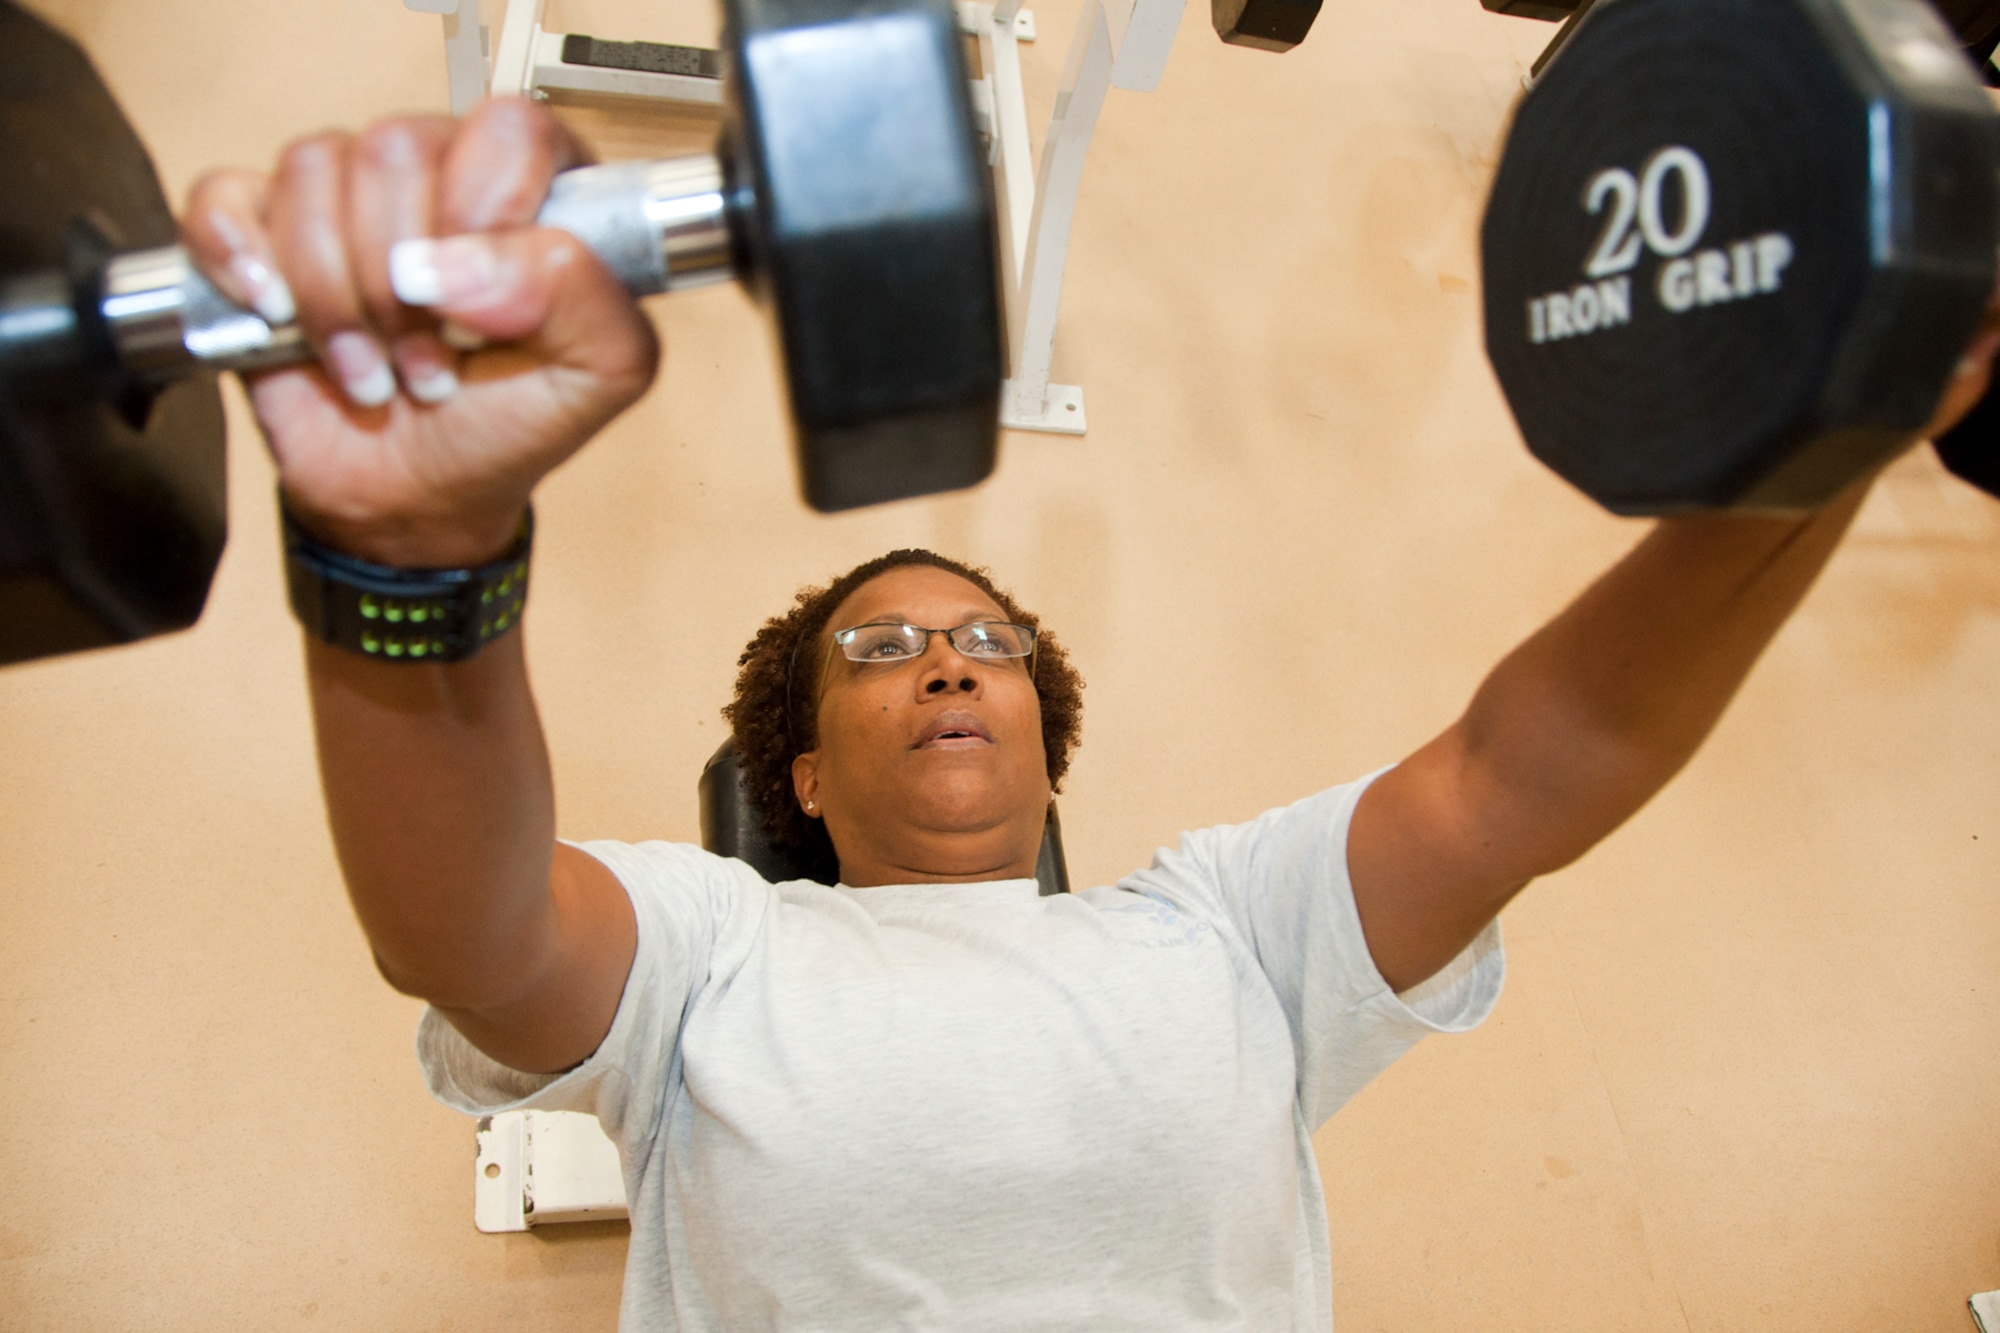 ROBINS AIR FORCE BASE, Ga. - Master Sgt. Michele Smith, unit training manager for the Readiness  Management Group here, conducts strength-training with weights in an effort to maintain a healthy lifestyle. Smith was diagnosed with two cerebral aneurysms last year after failing her fitness test. After surgery, Smith changed her fitness regimen and passed her PT test. (U.S. Air Force photo/Staff Sgt. Megan Tomkins)